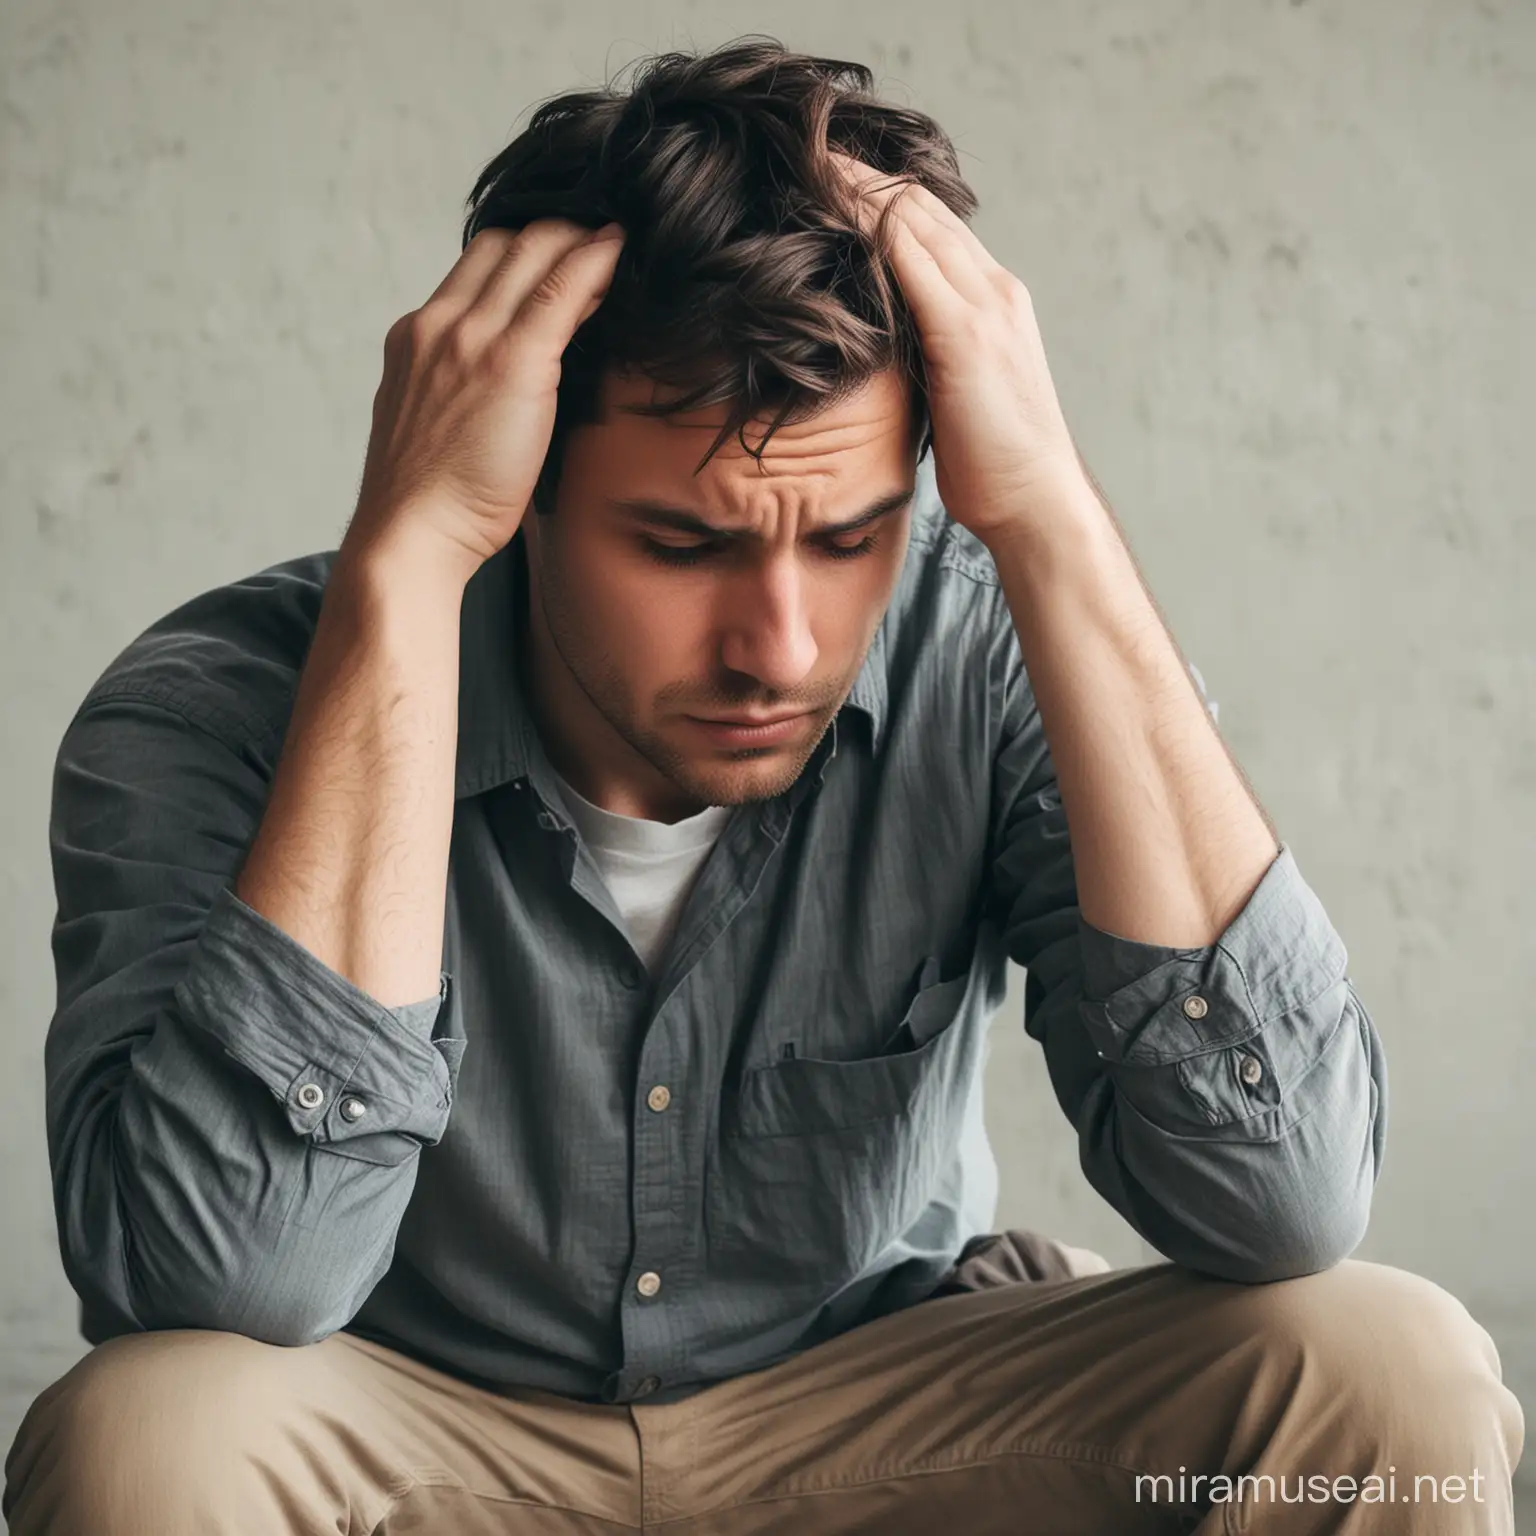 Depressed Man Sitting with Hand on Head